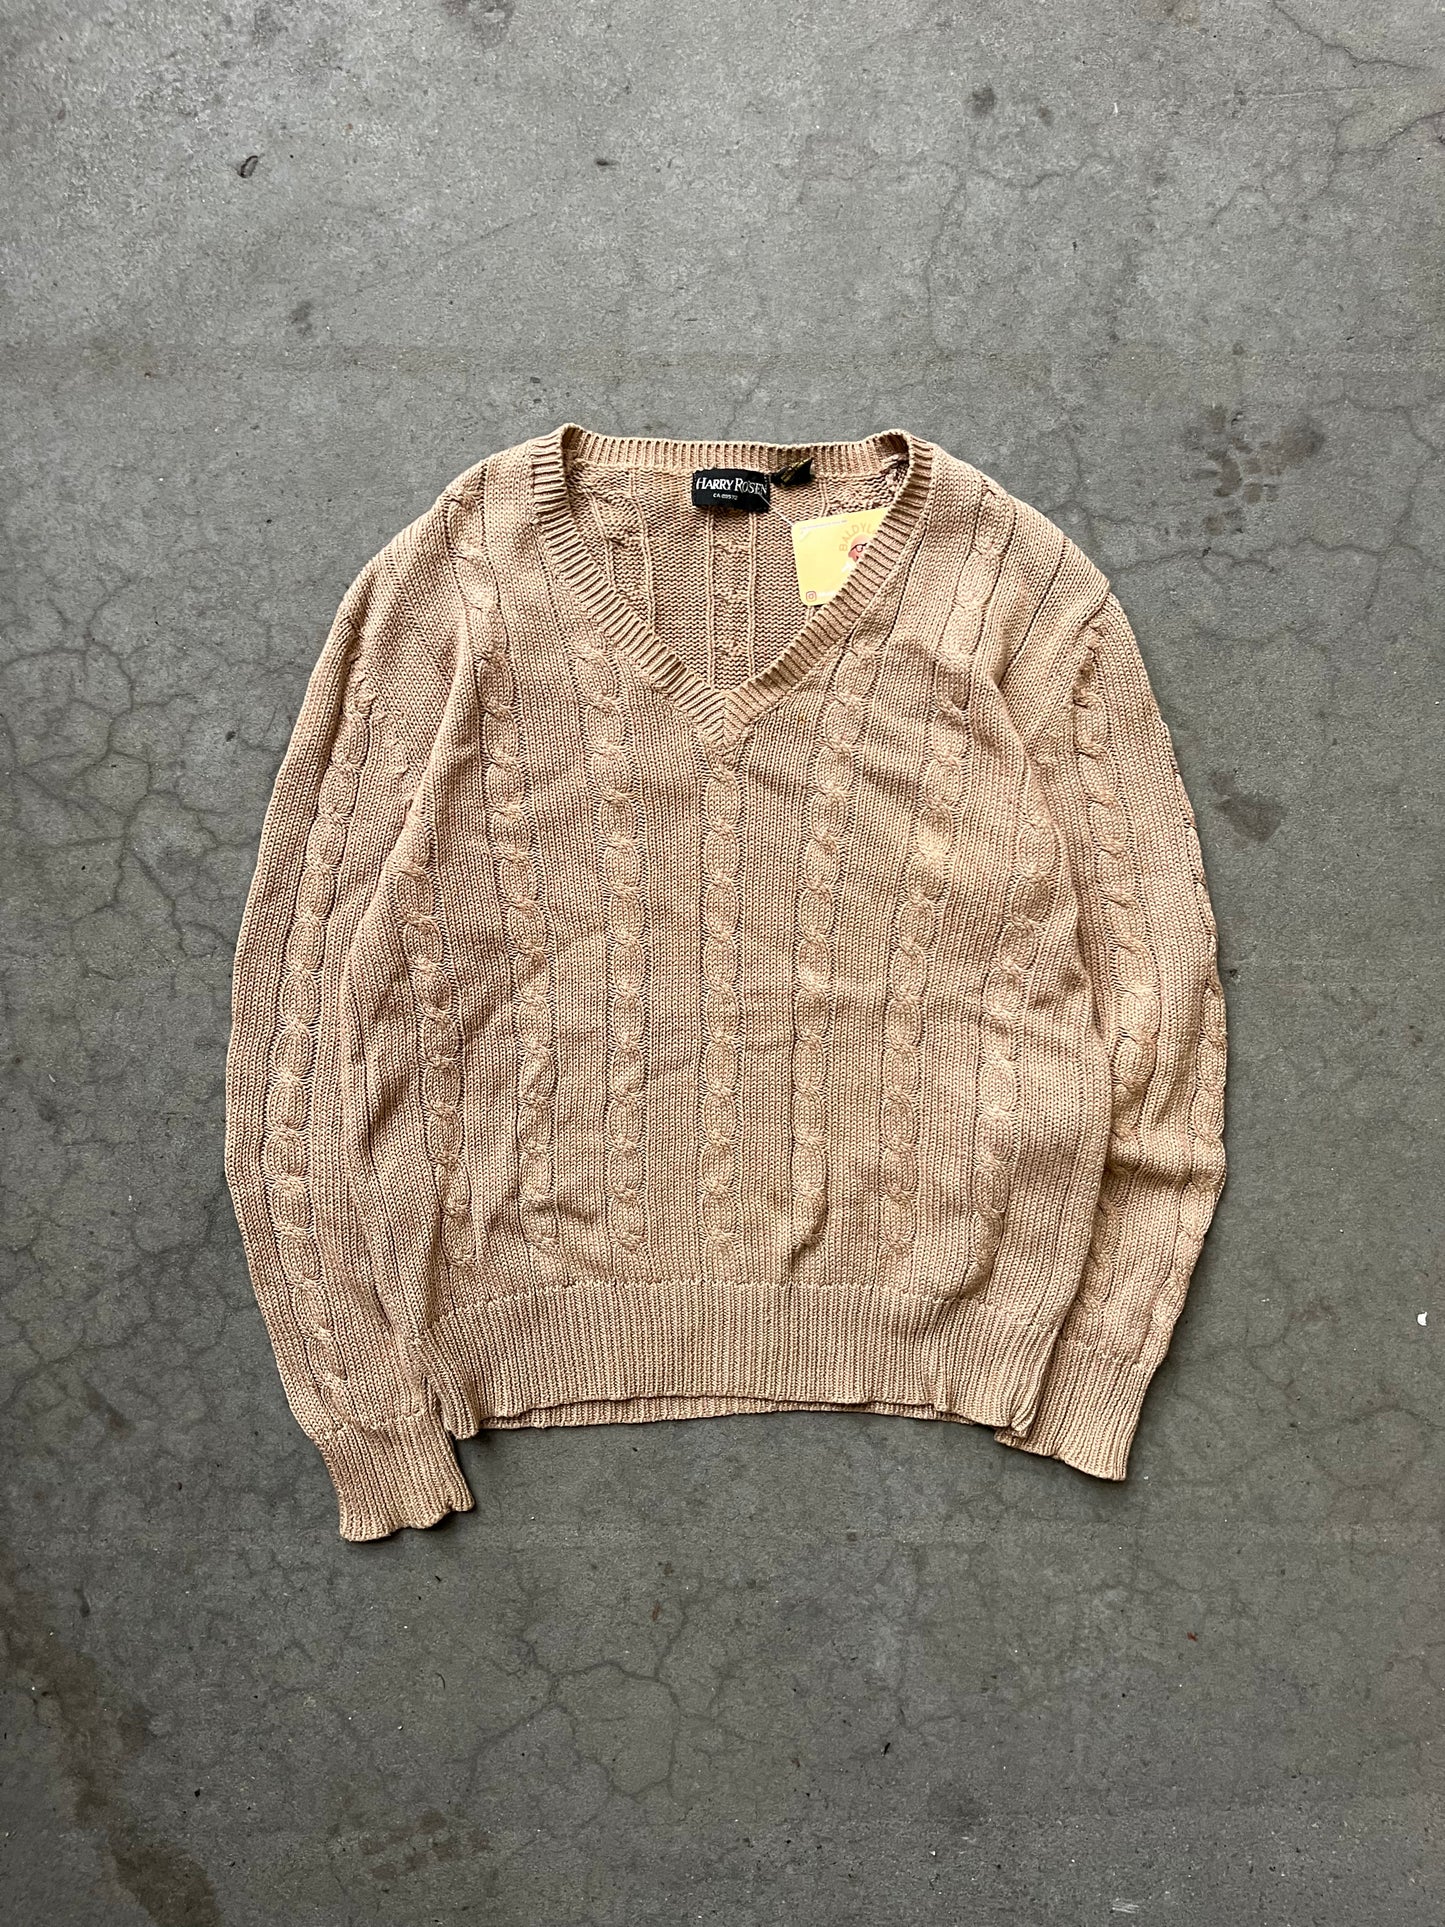 (S) 90s Vintage Harry Rosen Cable Knit